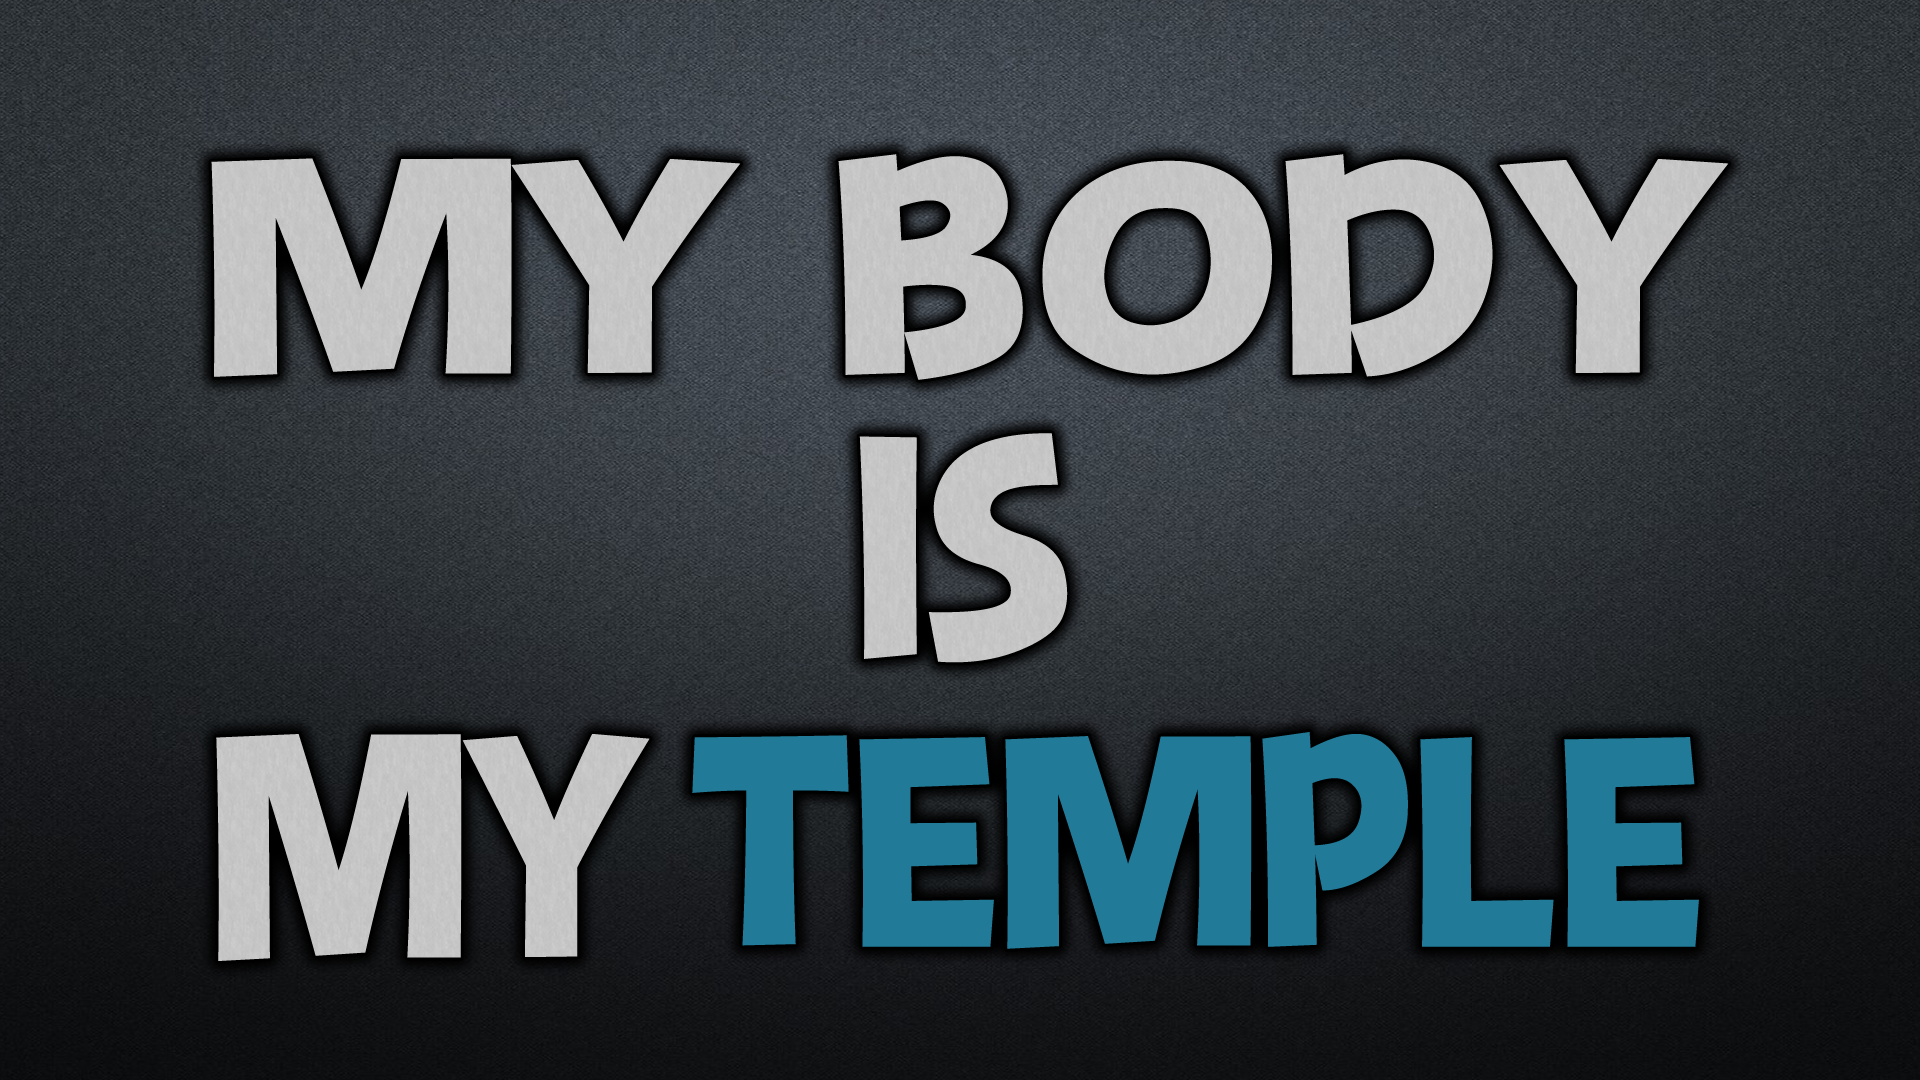 My Body Is Temple Wallpaper And Imag Png Image Pngio